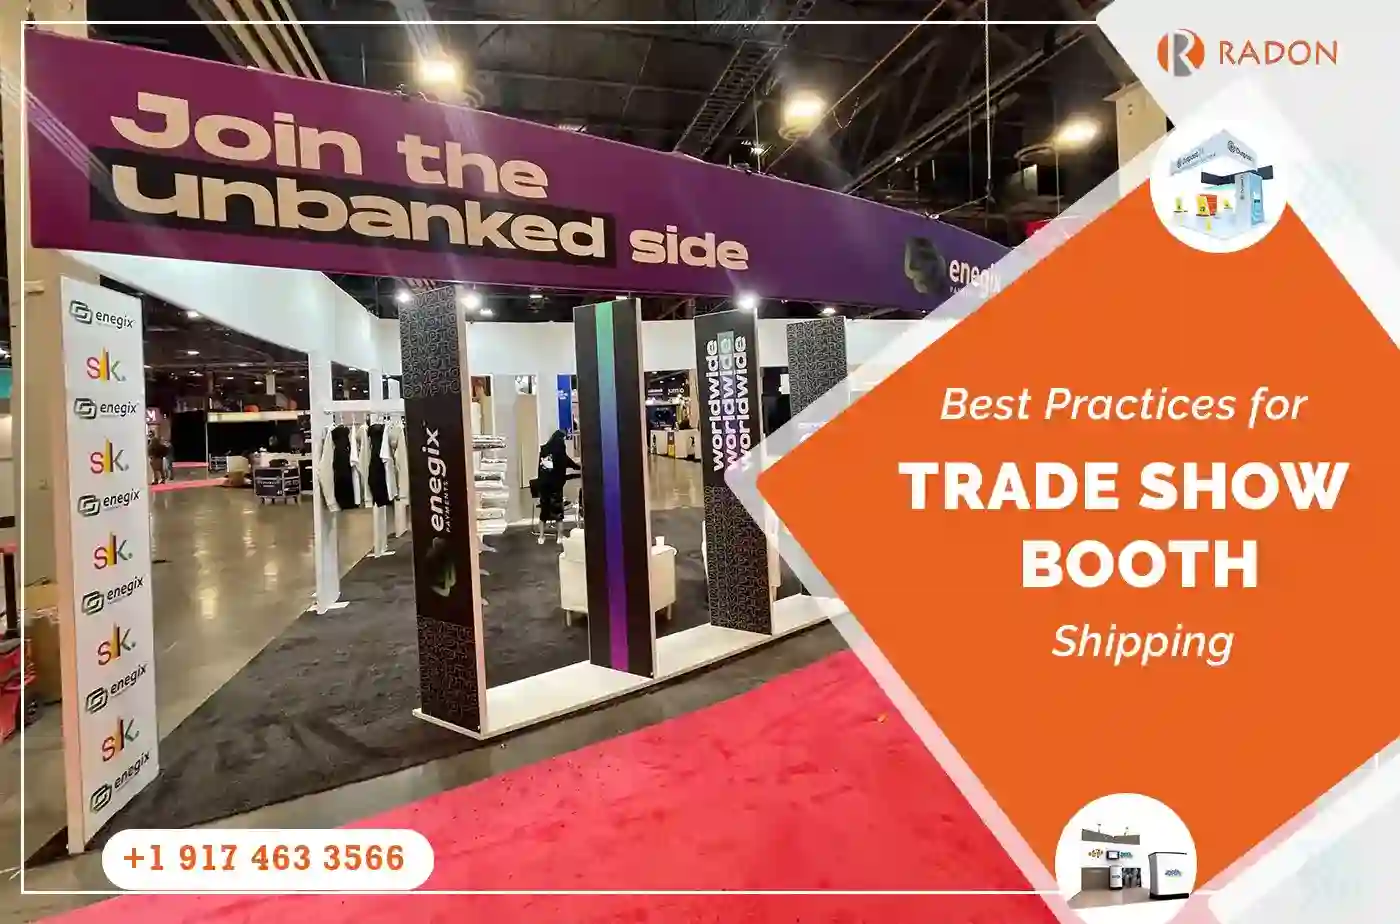 Best Practices for Trade Show Booth Shipping